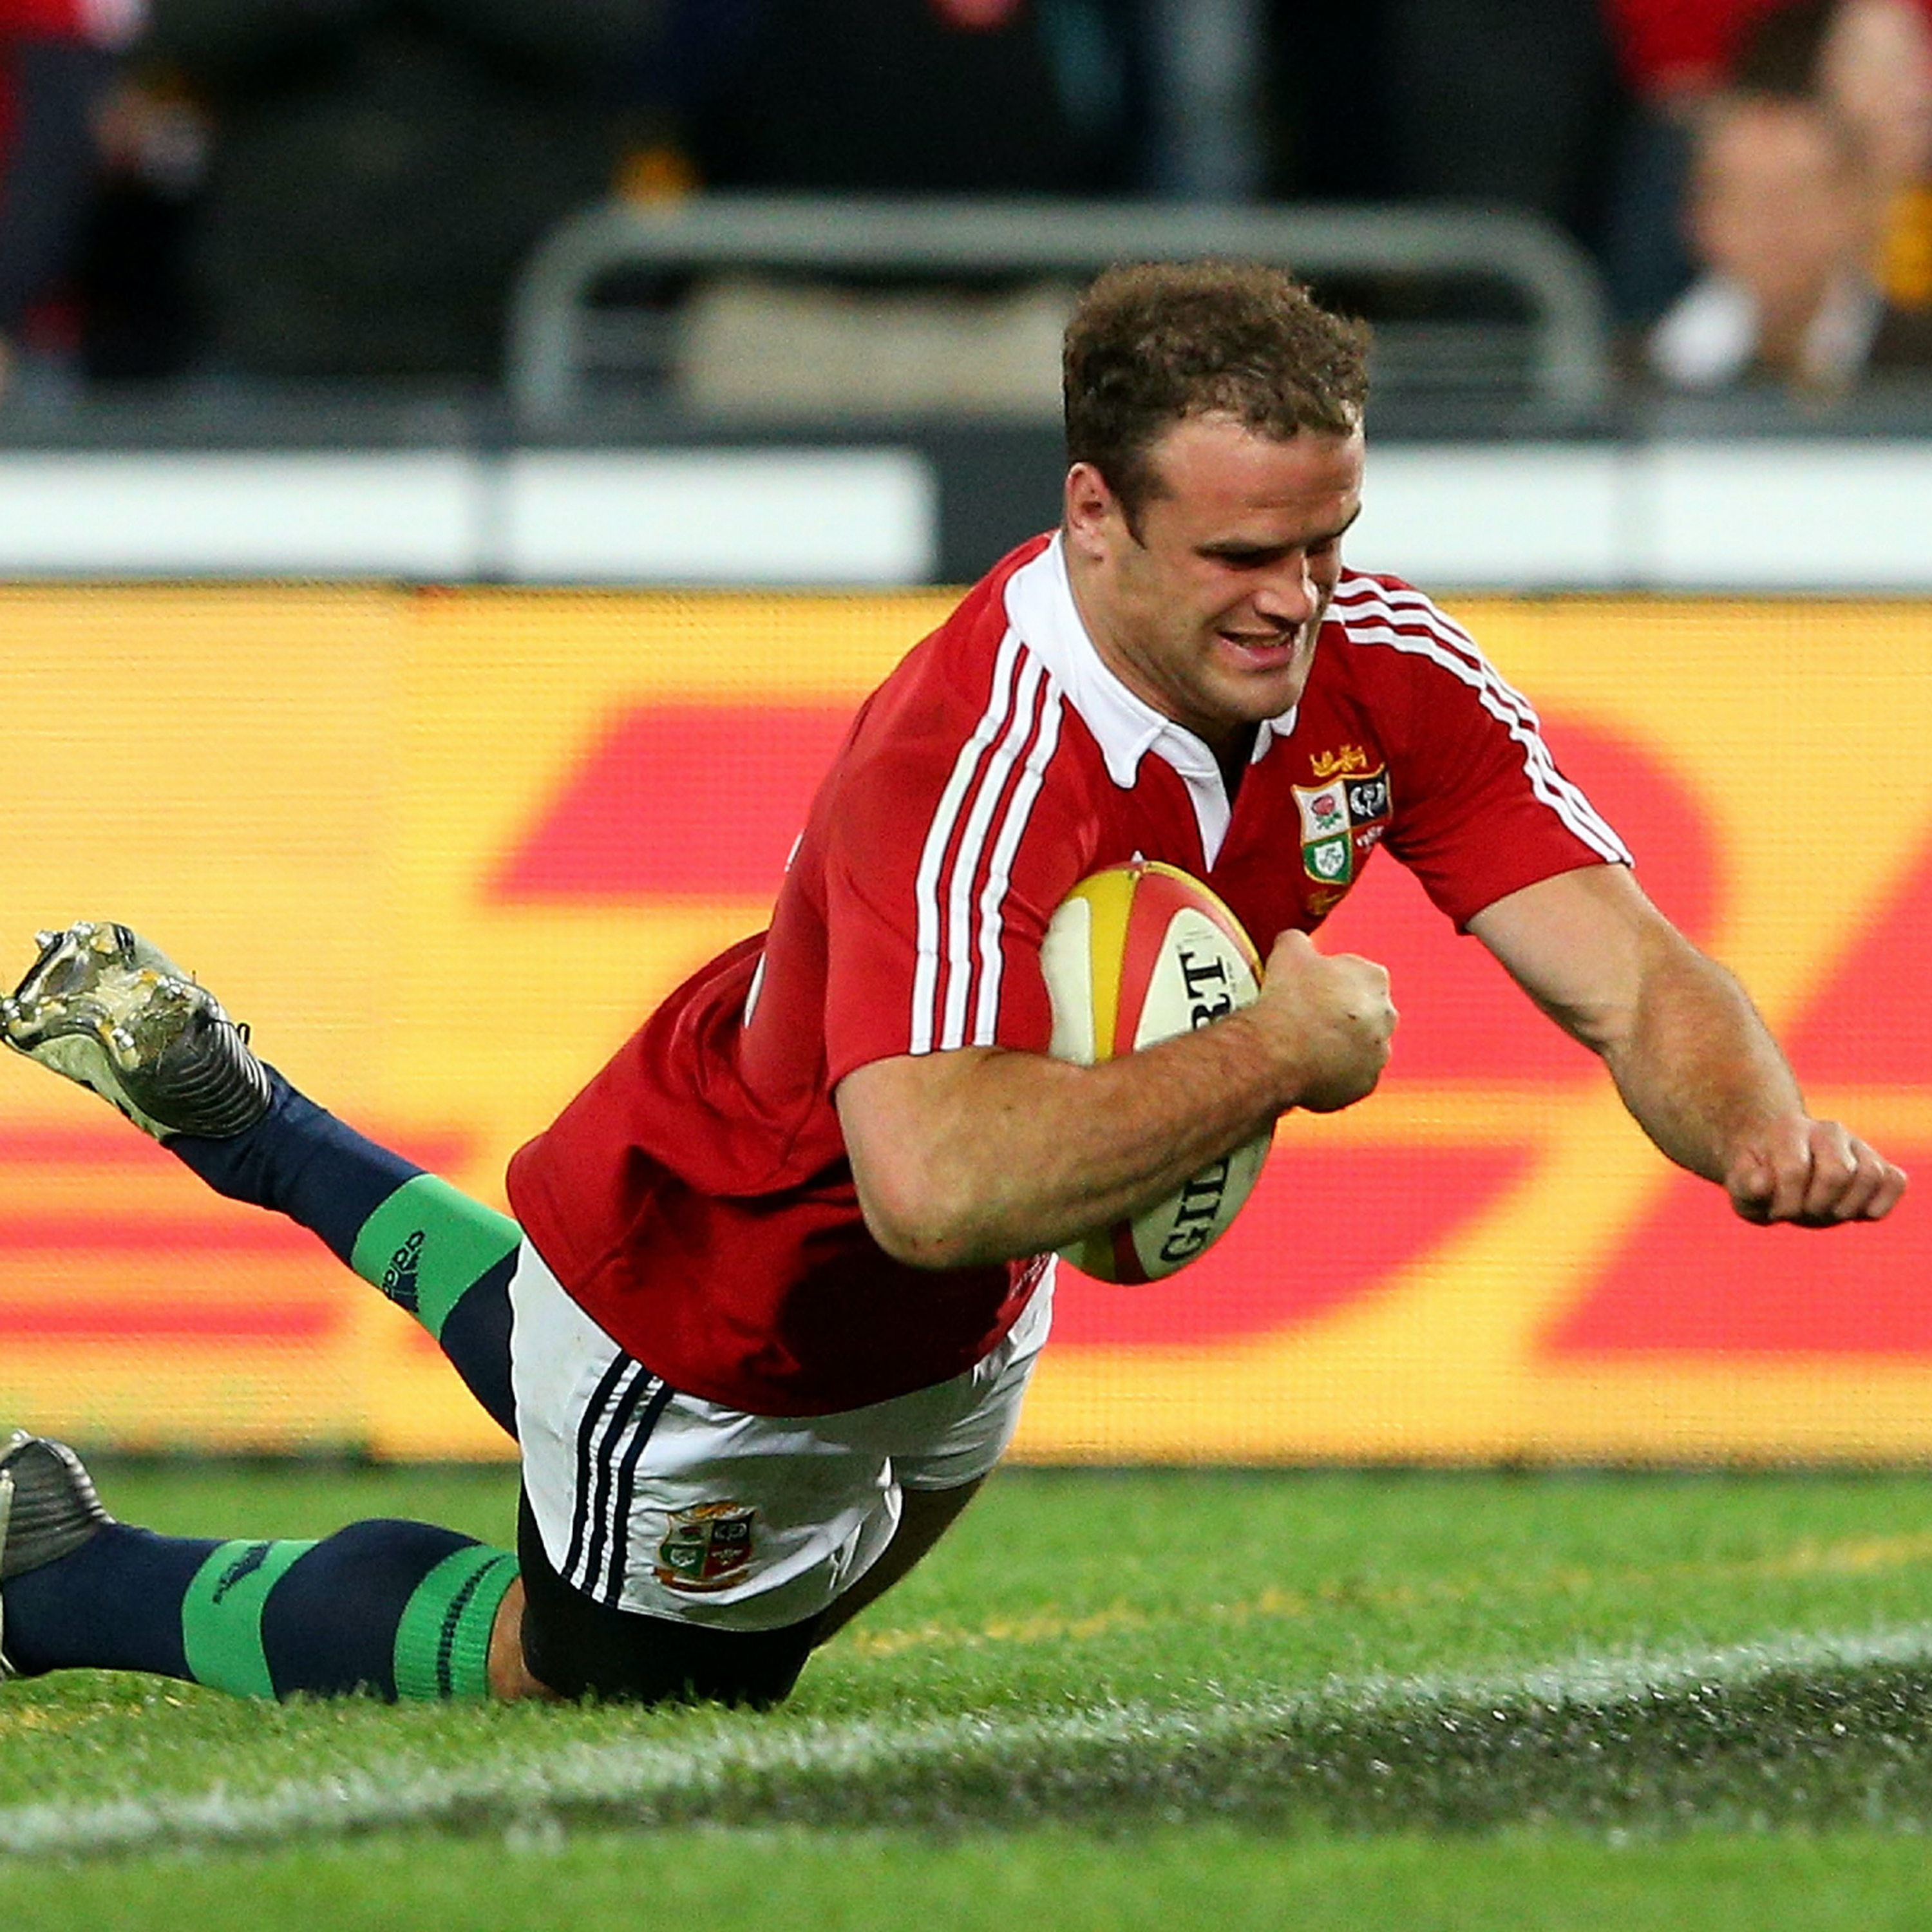 Bitesize: Jamie Roberts’ rugby career, from clubs, to Wales and being a Lion